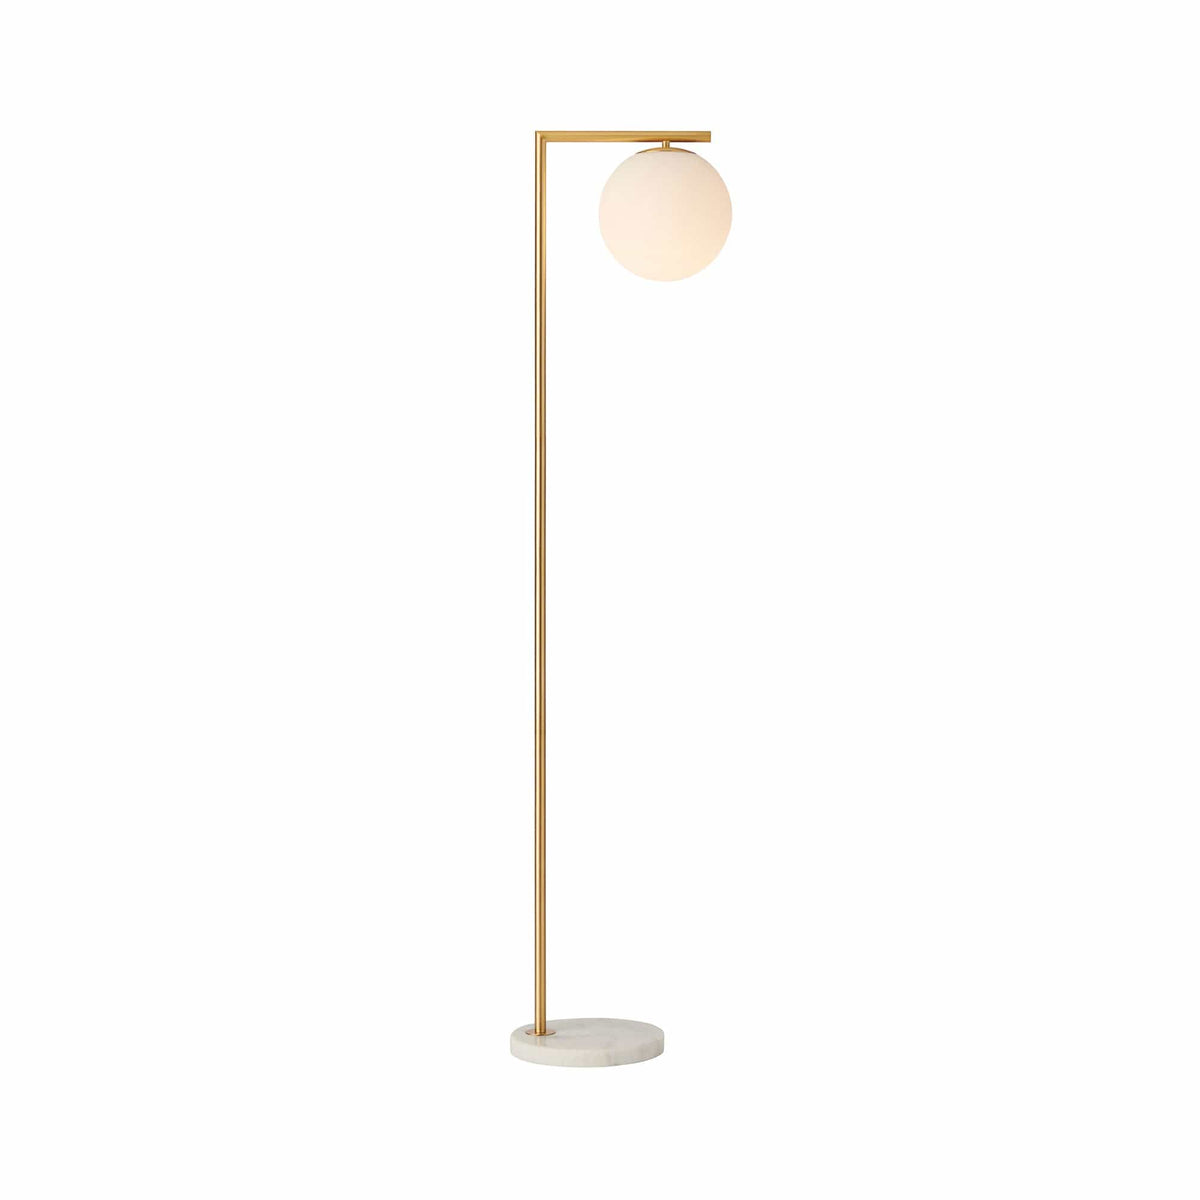 Mayfield Lamps Remi Lamp - Floor (6920237514940)